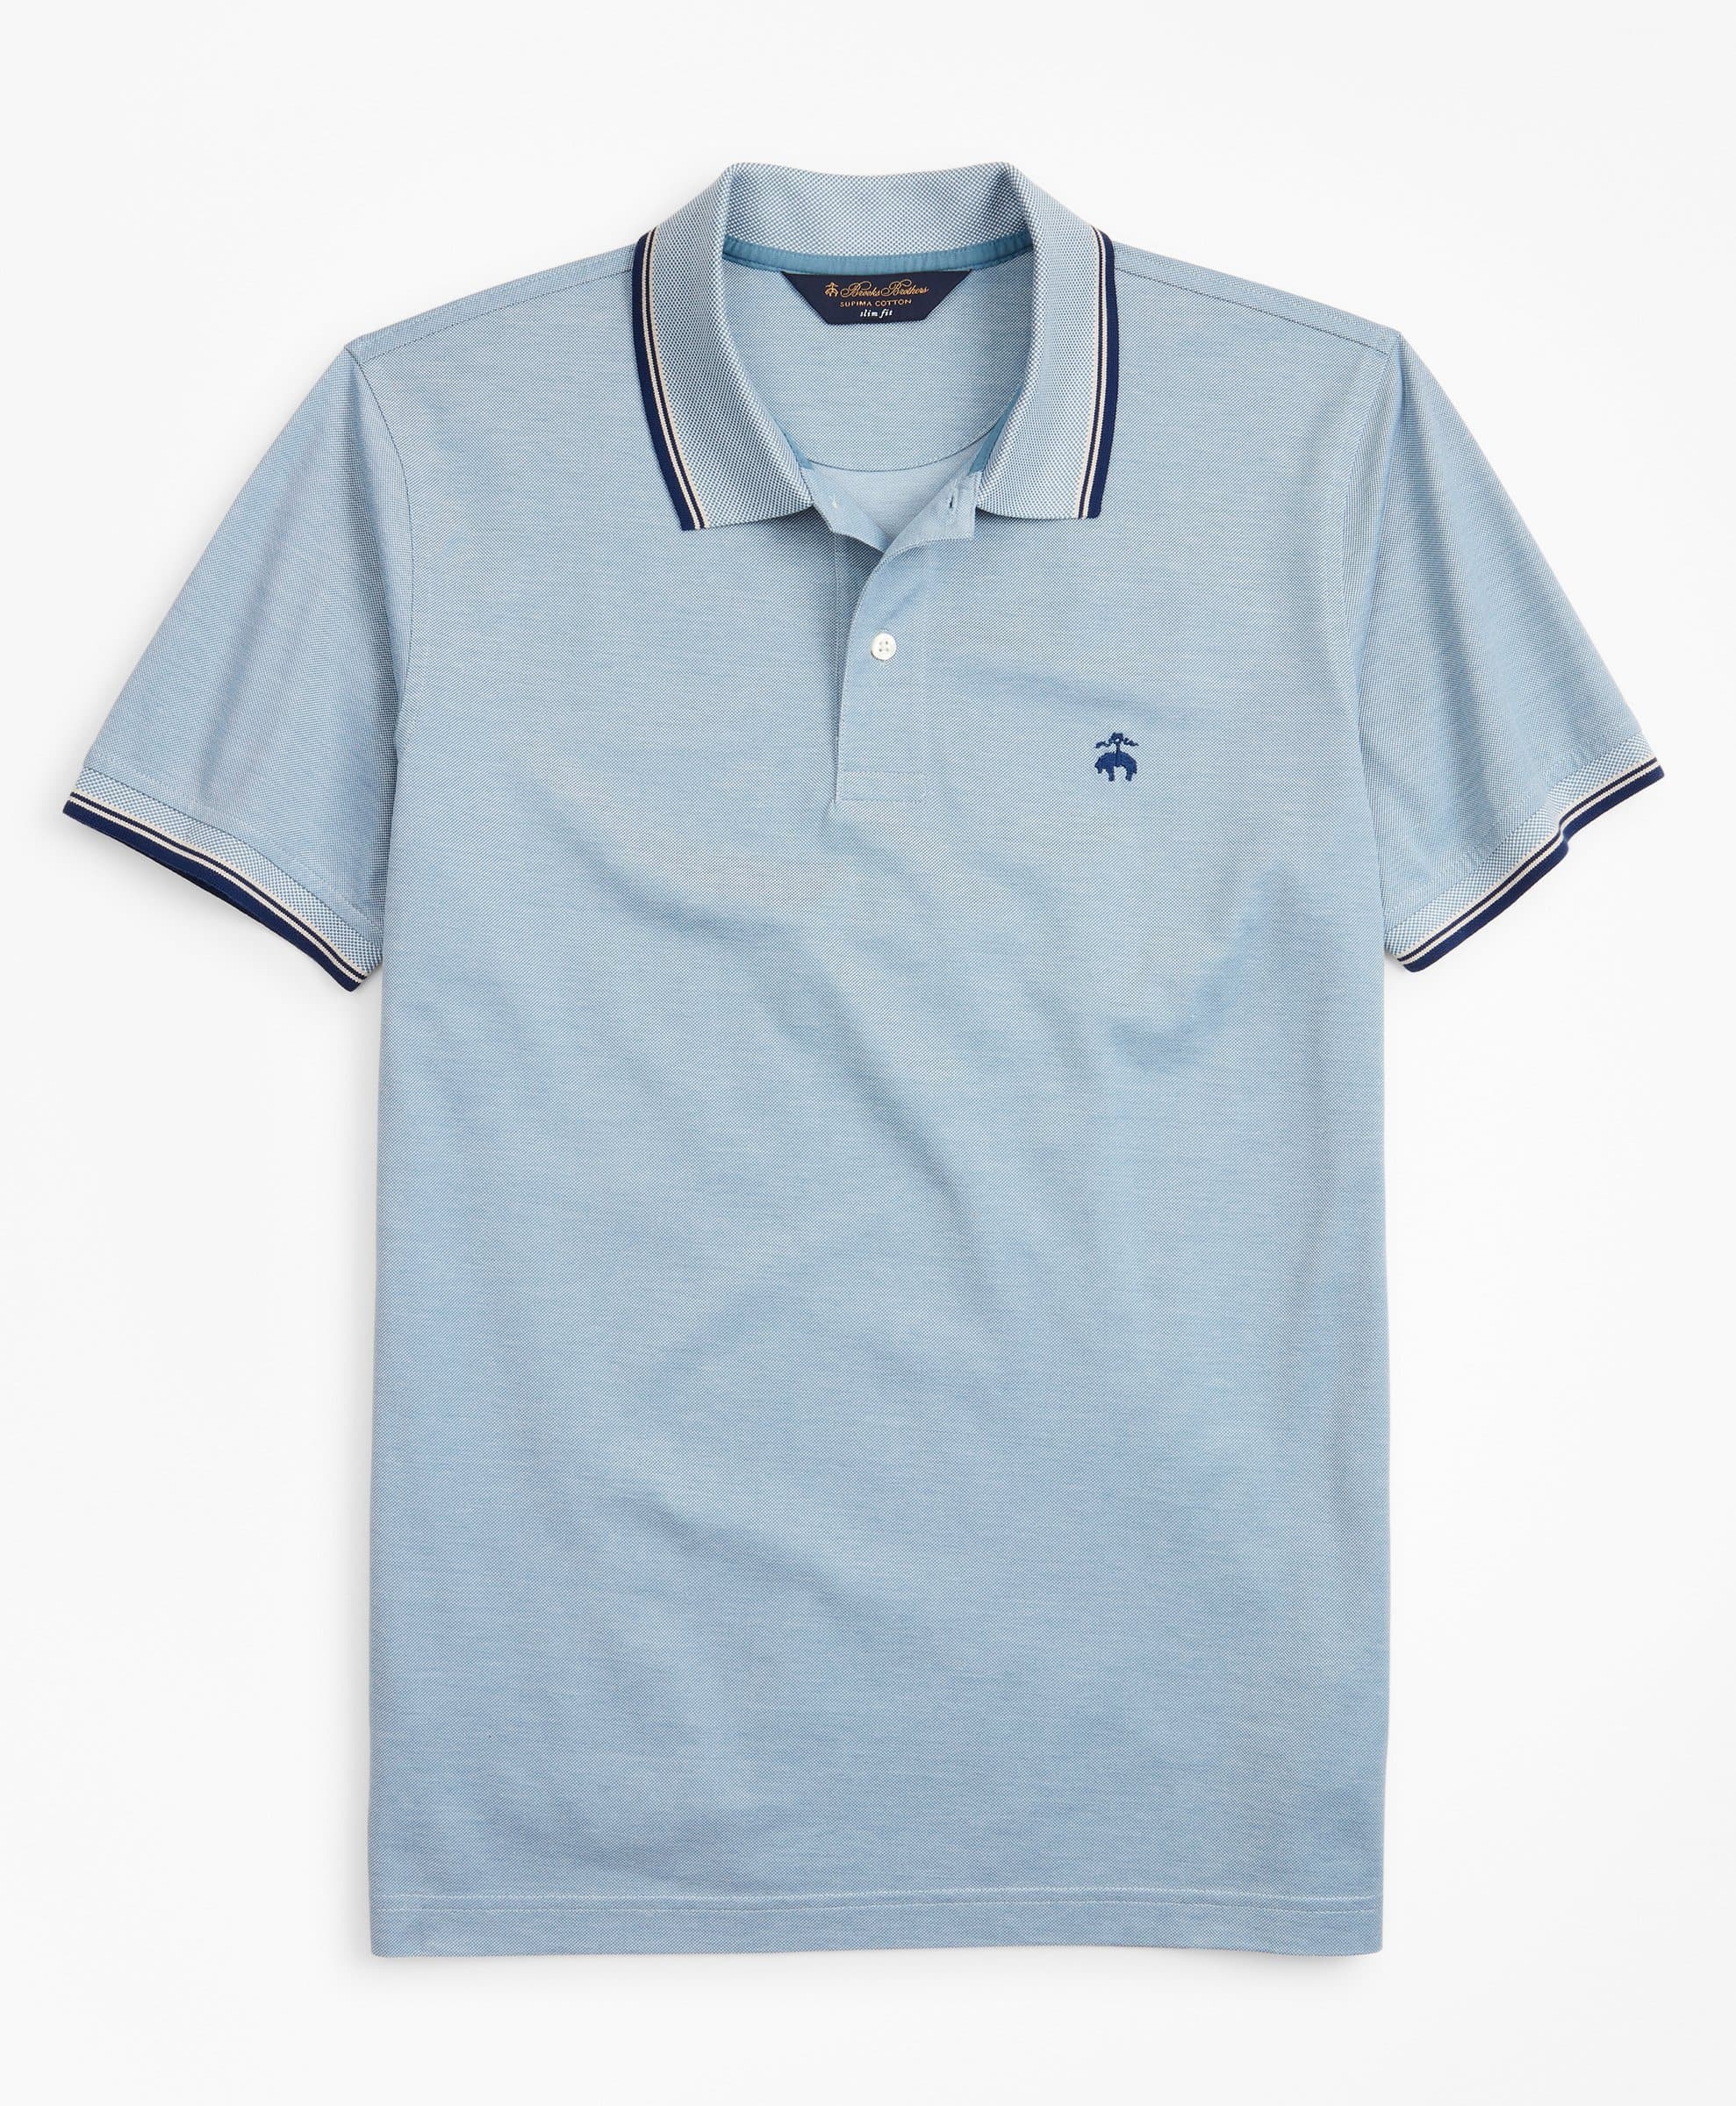 Brooks-Brothers-Slim-Fit-Tipped-Polo-Shirt-Provincial-Blue-000100154831-002